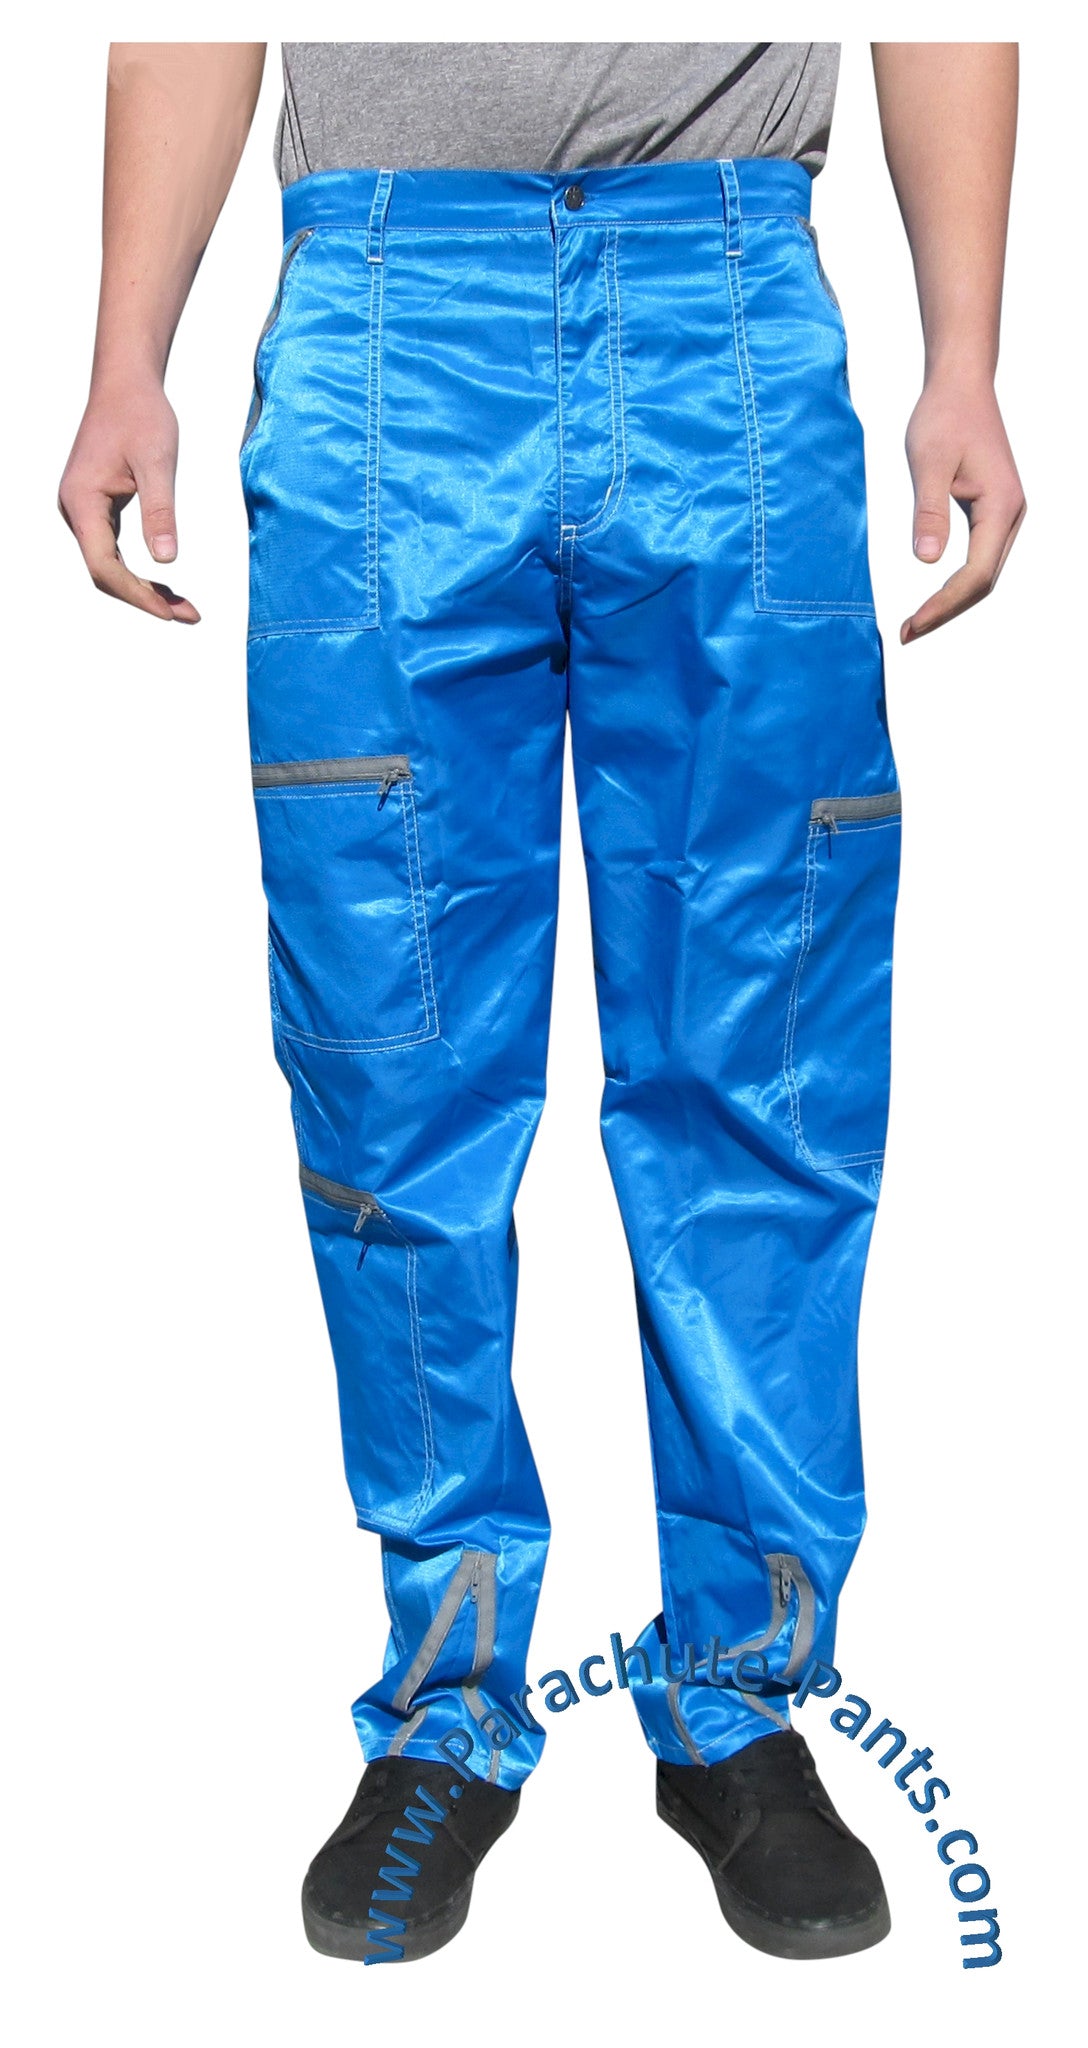 Panno D'Or Blue Nylon Parachute Pants with Grey Zippers | The Parachute